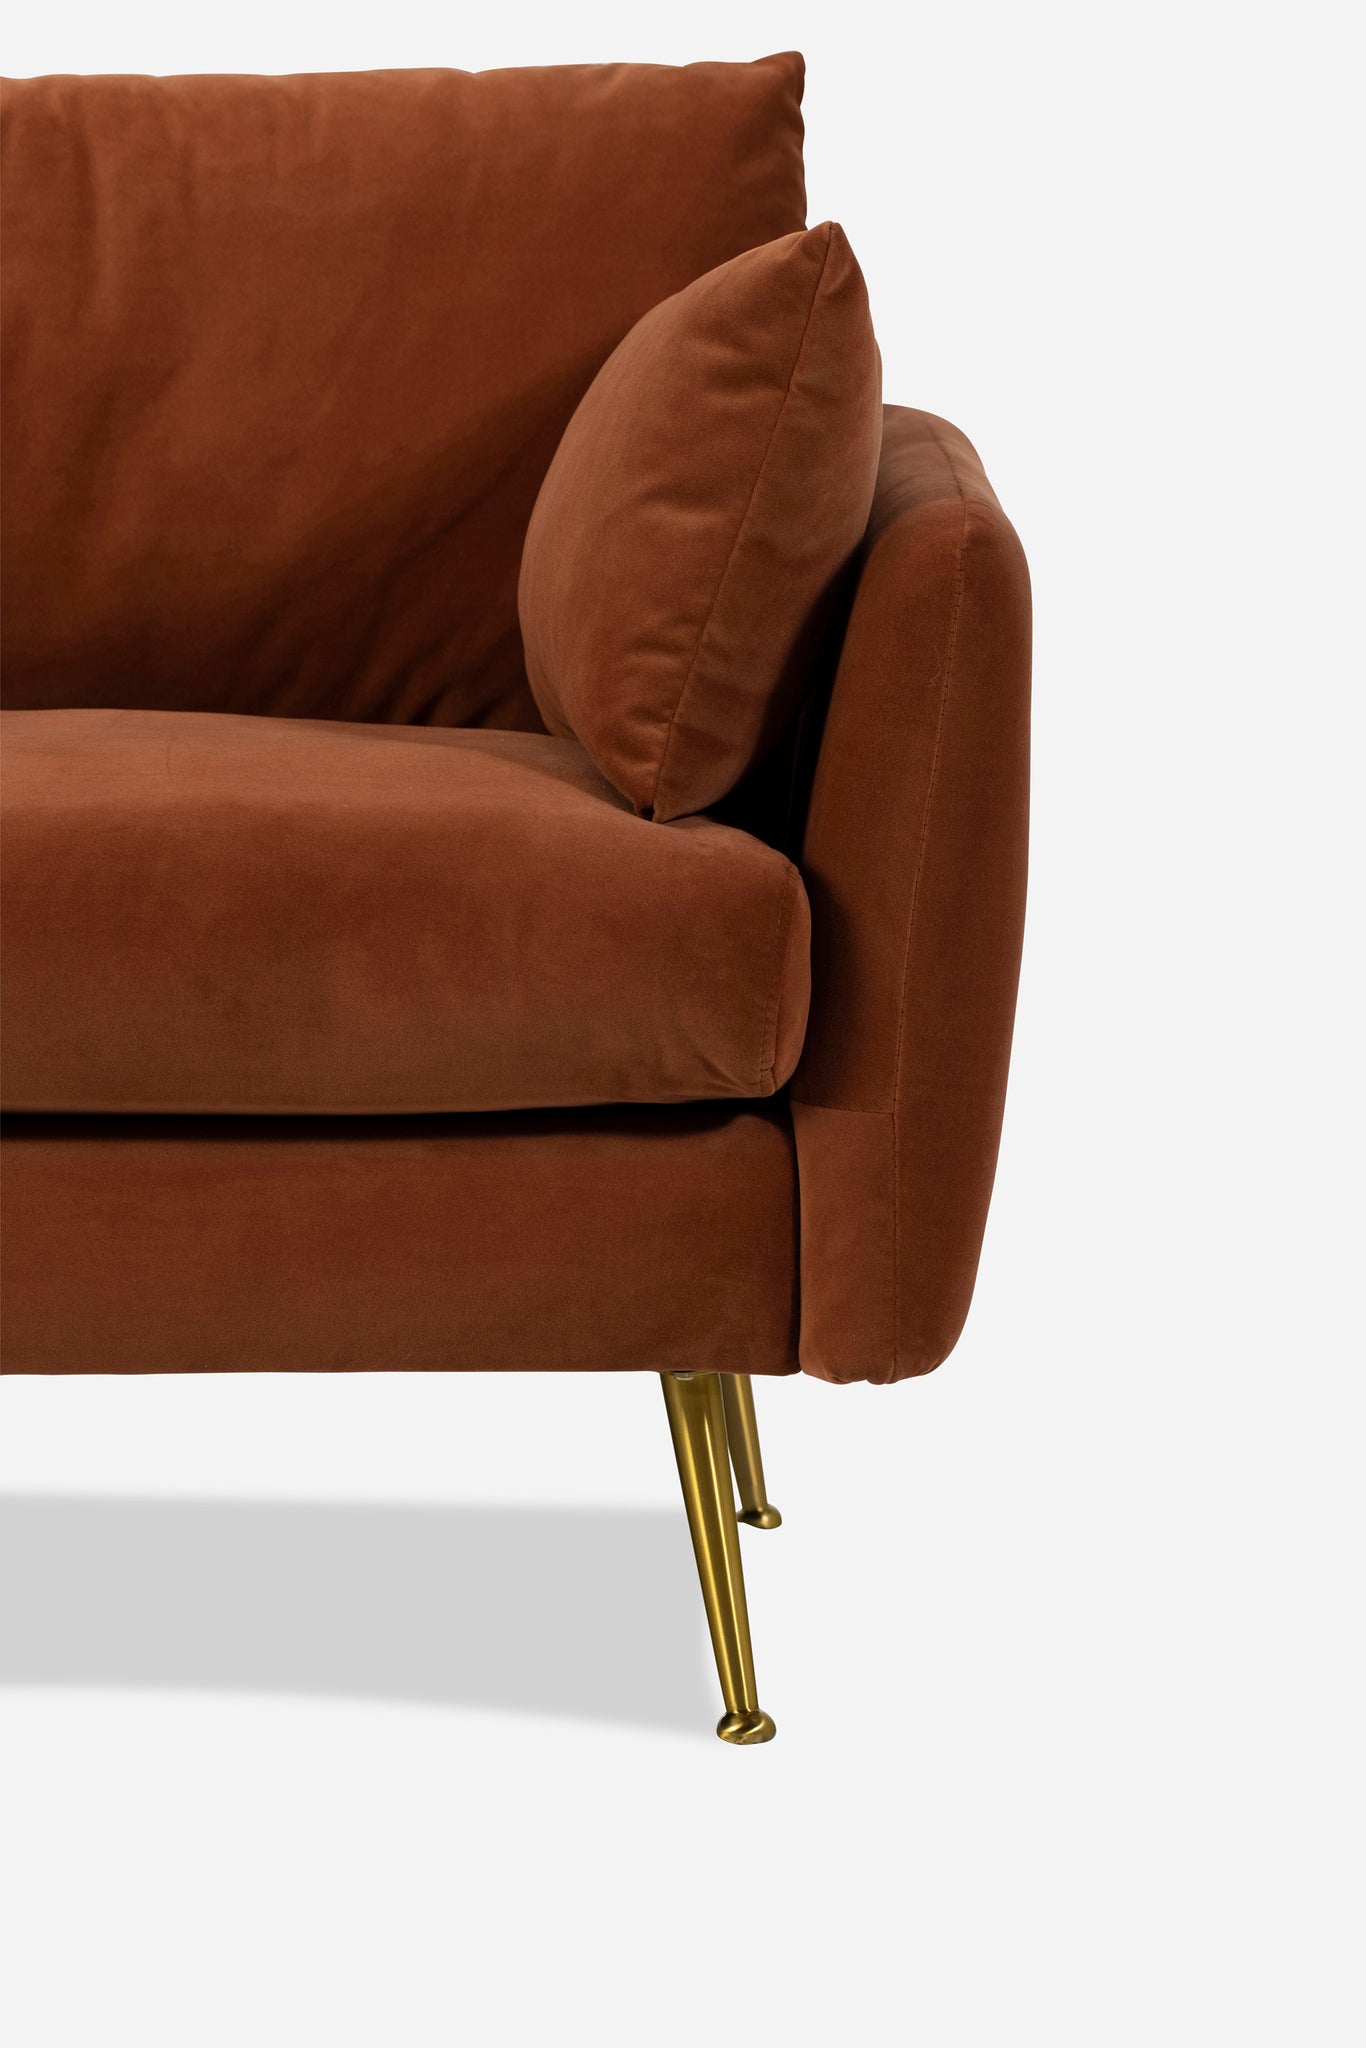 park sectional sofa shown in rust velvet with gold legs left facing right facing